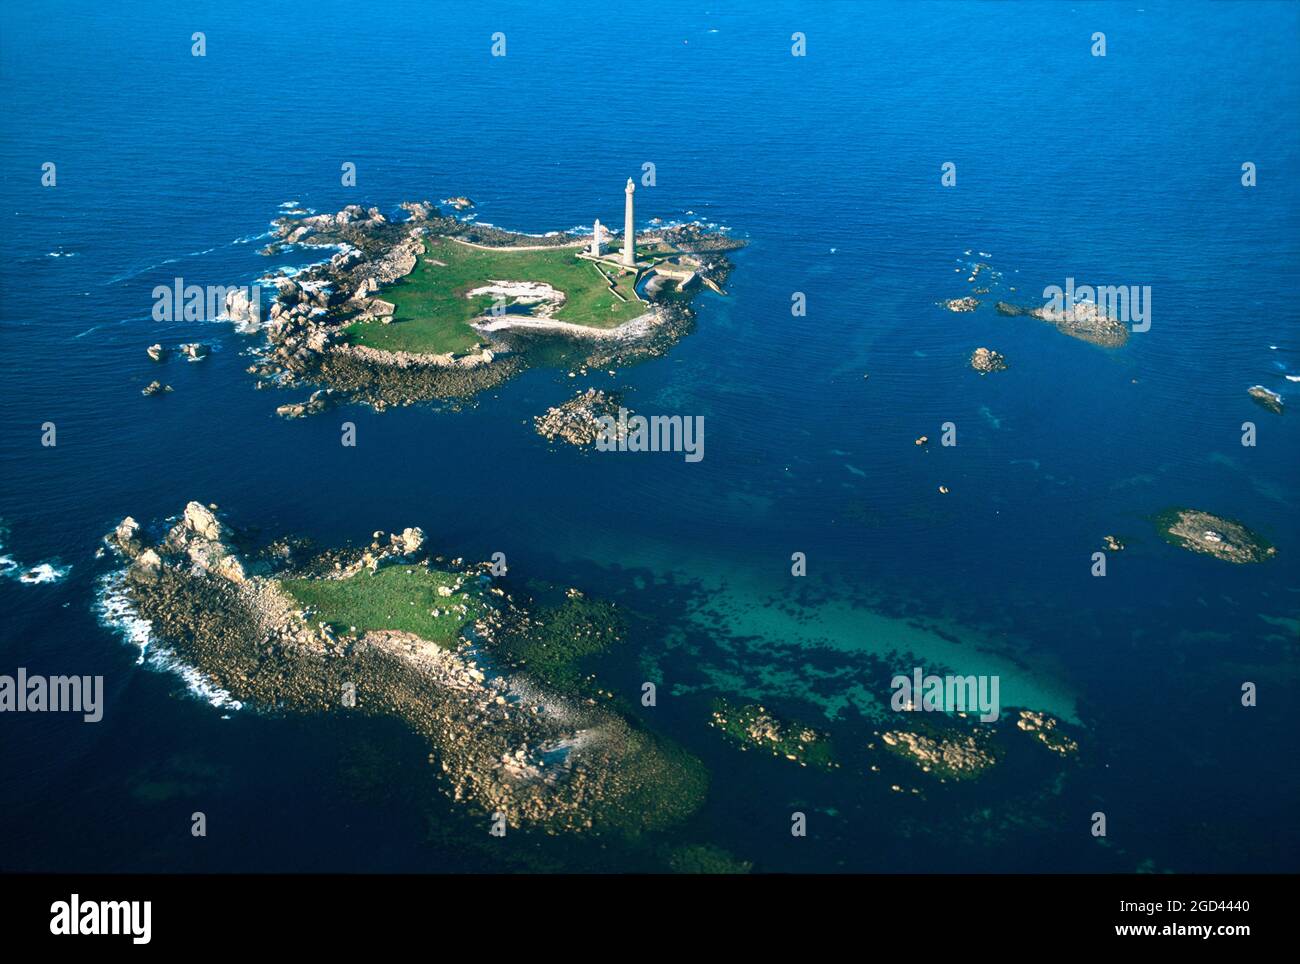 FINISTERE (29) BRITTANY, AERIAL VIEW OF THE VIRGIN ISLAND LIGHTHOUSE WAS BUILT IN 1897, 1902 IN THE LILIA ARCHIPELAGO, IT IS A HISTORIC MONUMENT, FRAN Stock Photo